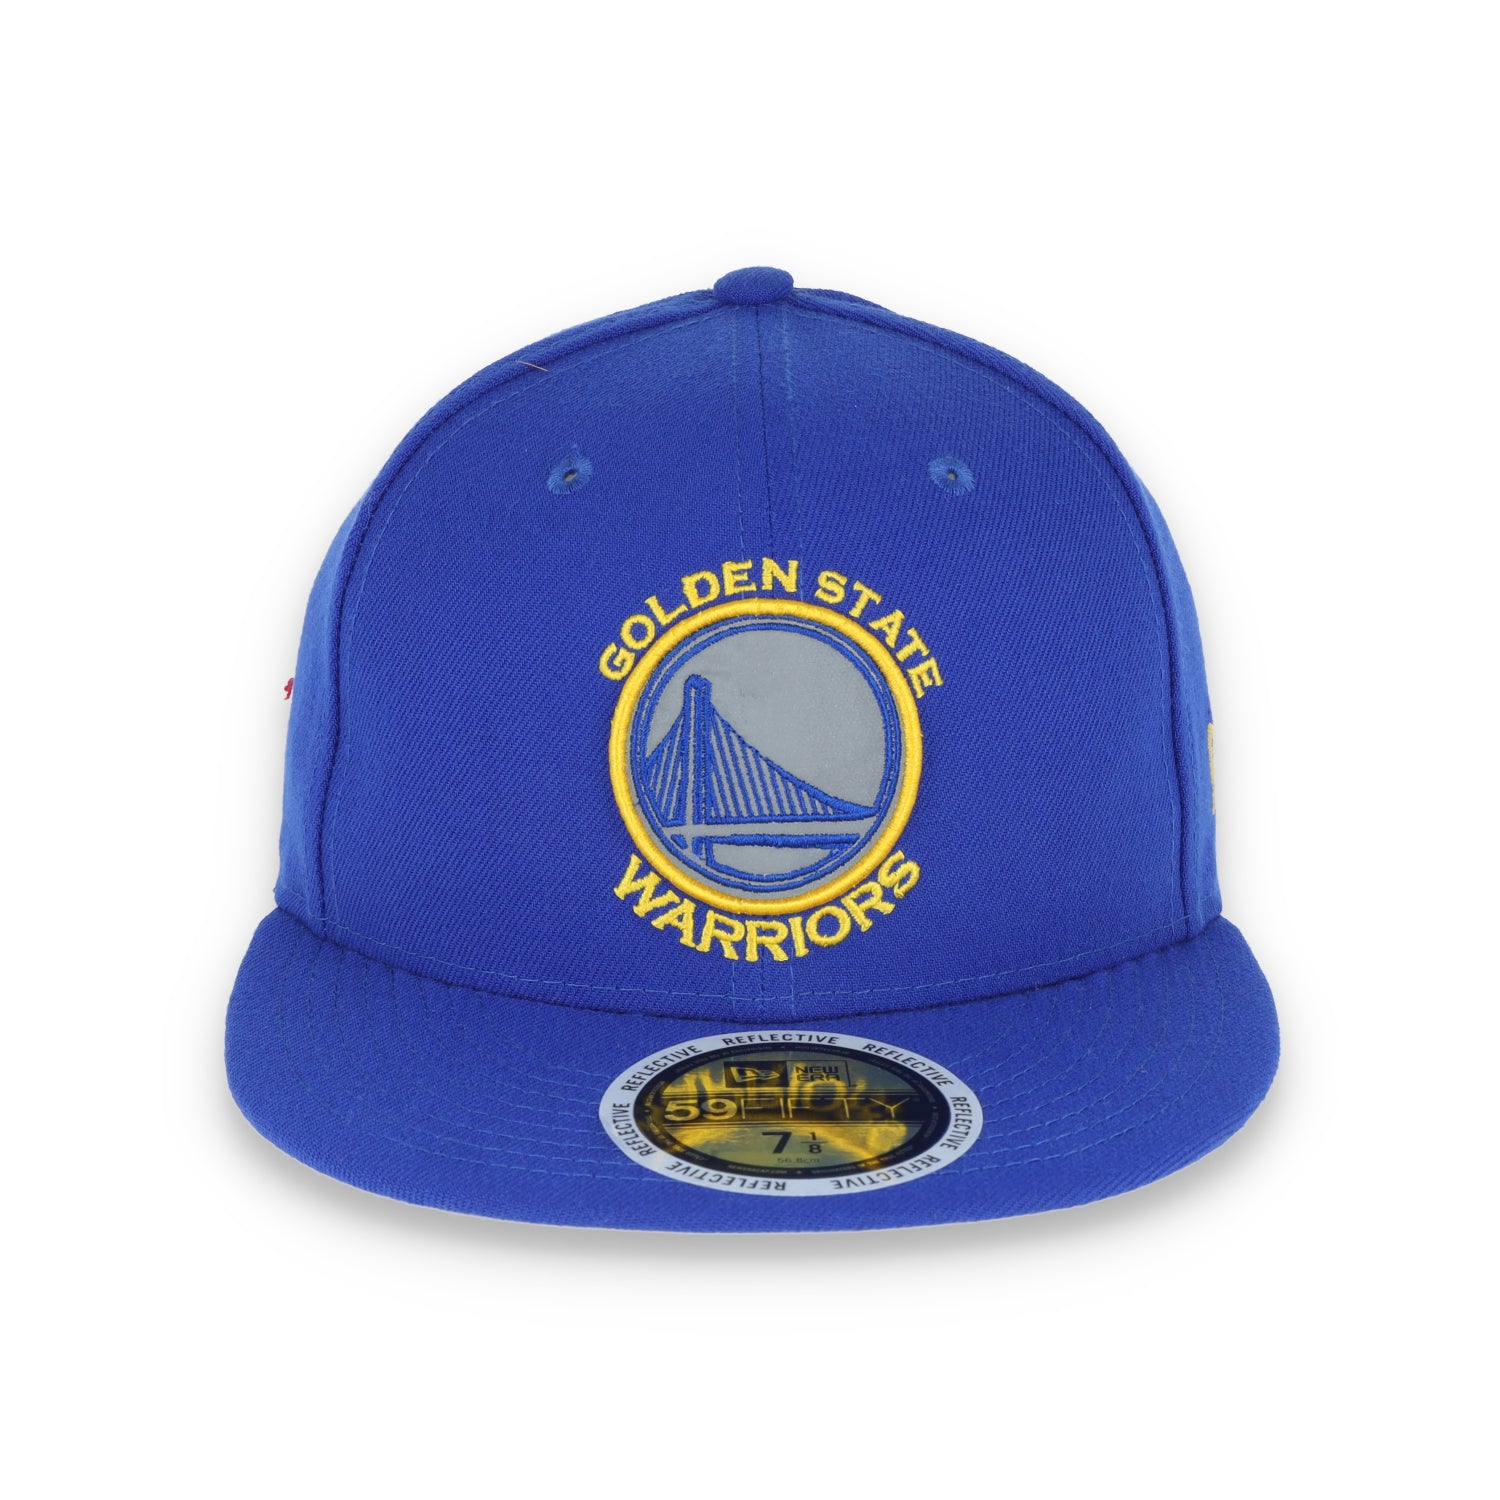 GOLDEN STATE WARRIORS REFLECTIVE BASIC 59FIFTY HAT-ROYAL BLUE